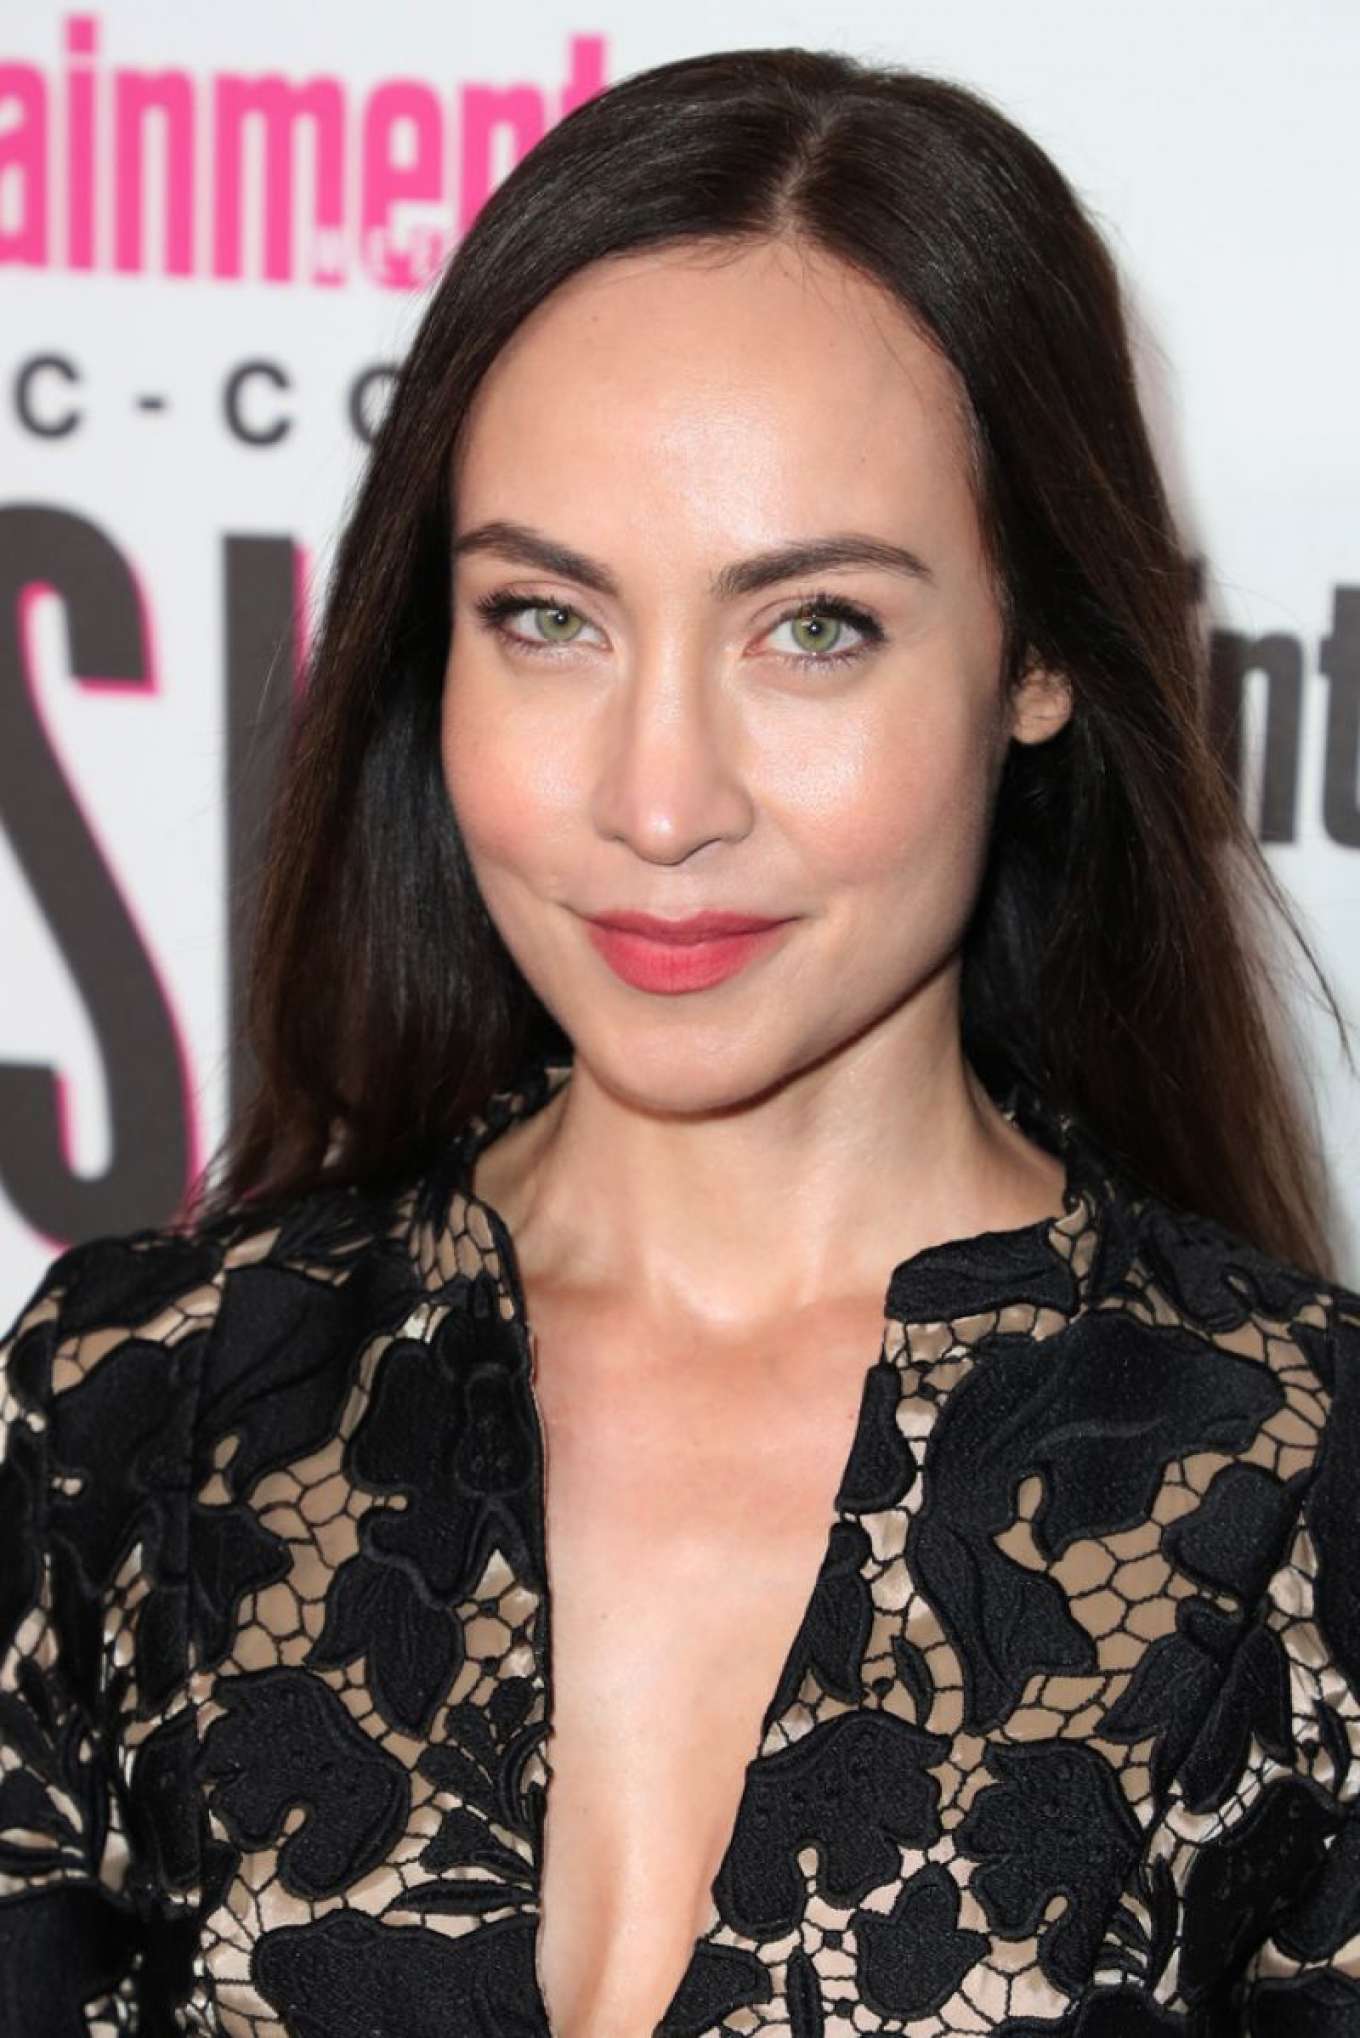 Courtney Ford 2018 : Courtney Ford: 2018 Entertainment Weekly Comic-Con Par...